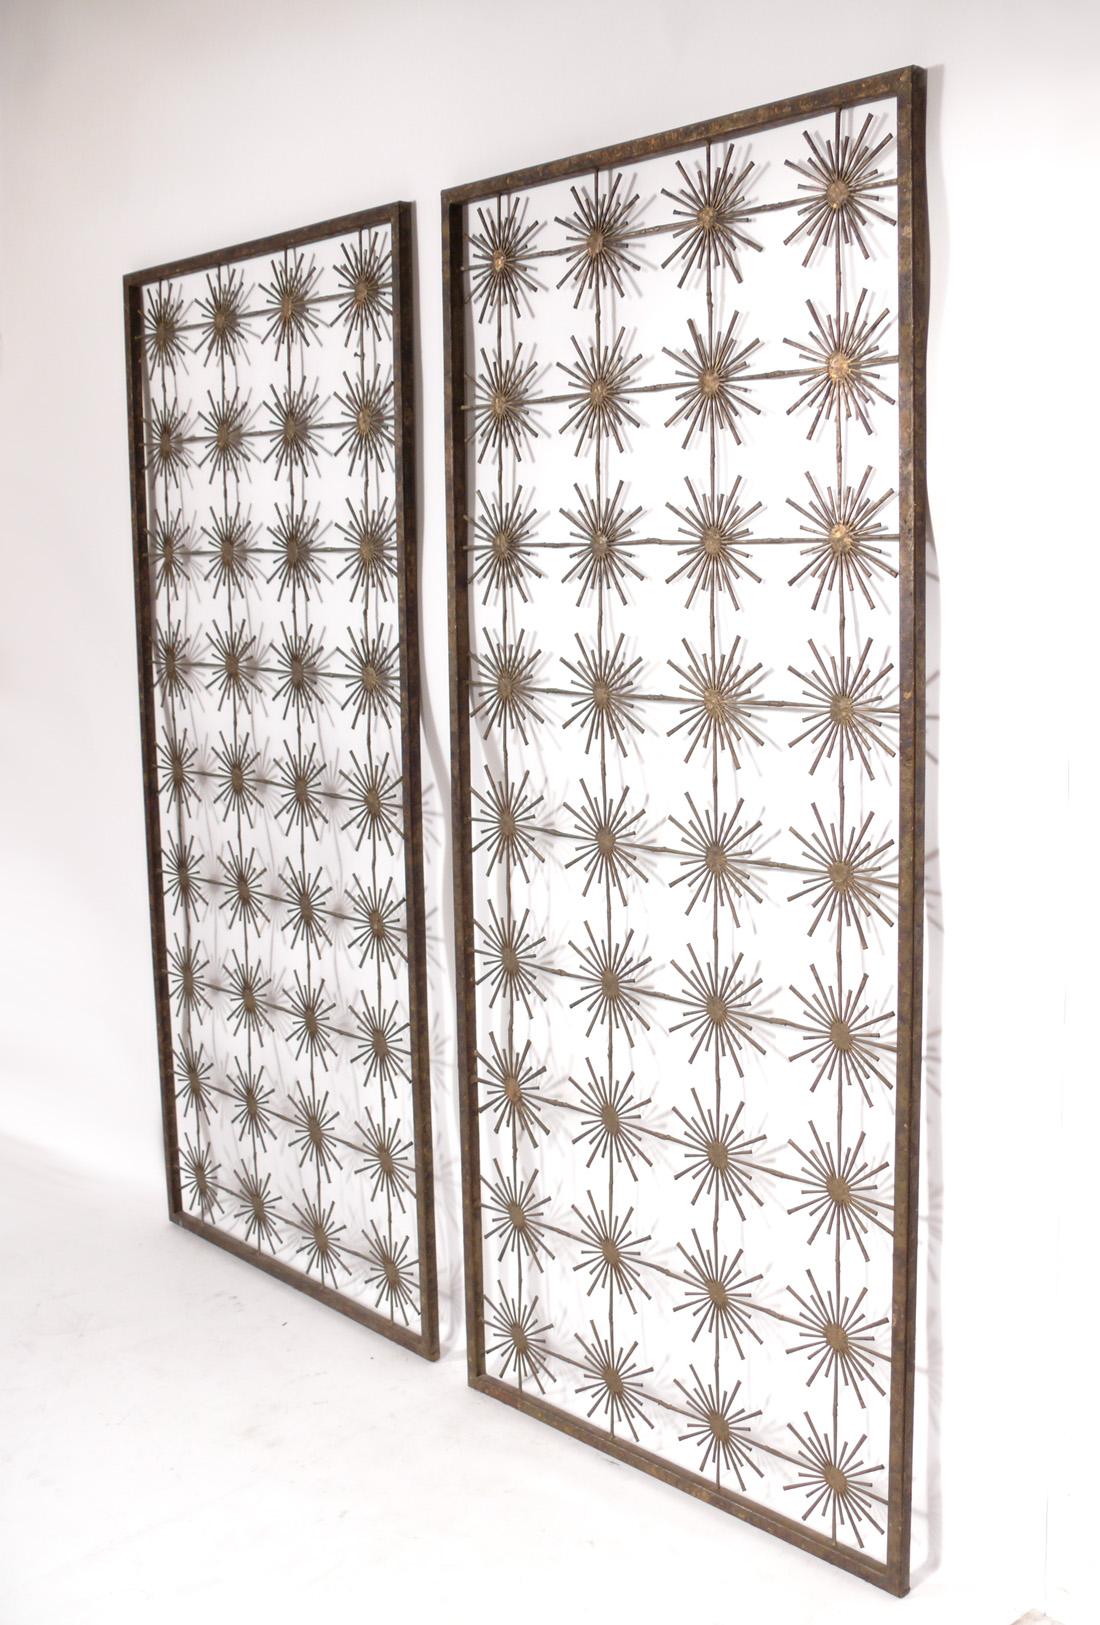 Pair of unique sculptural screens or room dividers, hand made by Silas Seandel, American, circa 1960s. They retain their warm original patina. These came from a Long Island, NY home where Seandel completed several custom pieces. These were